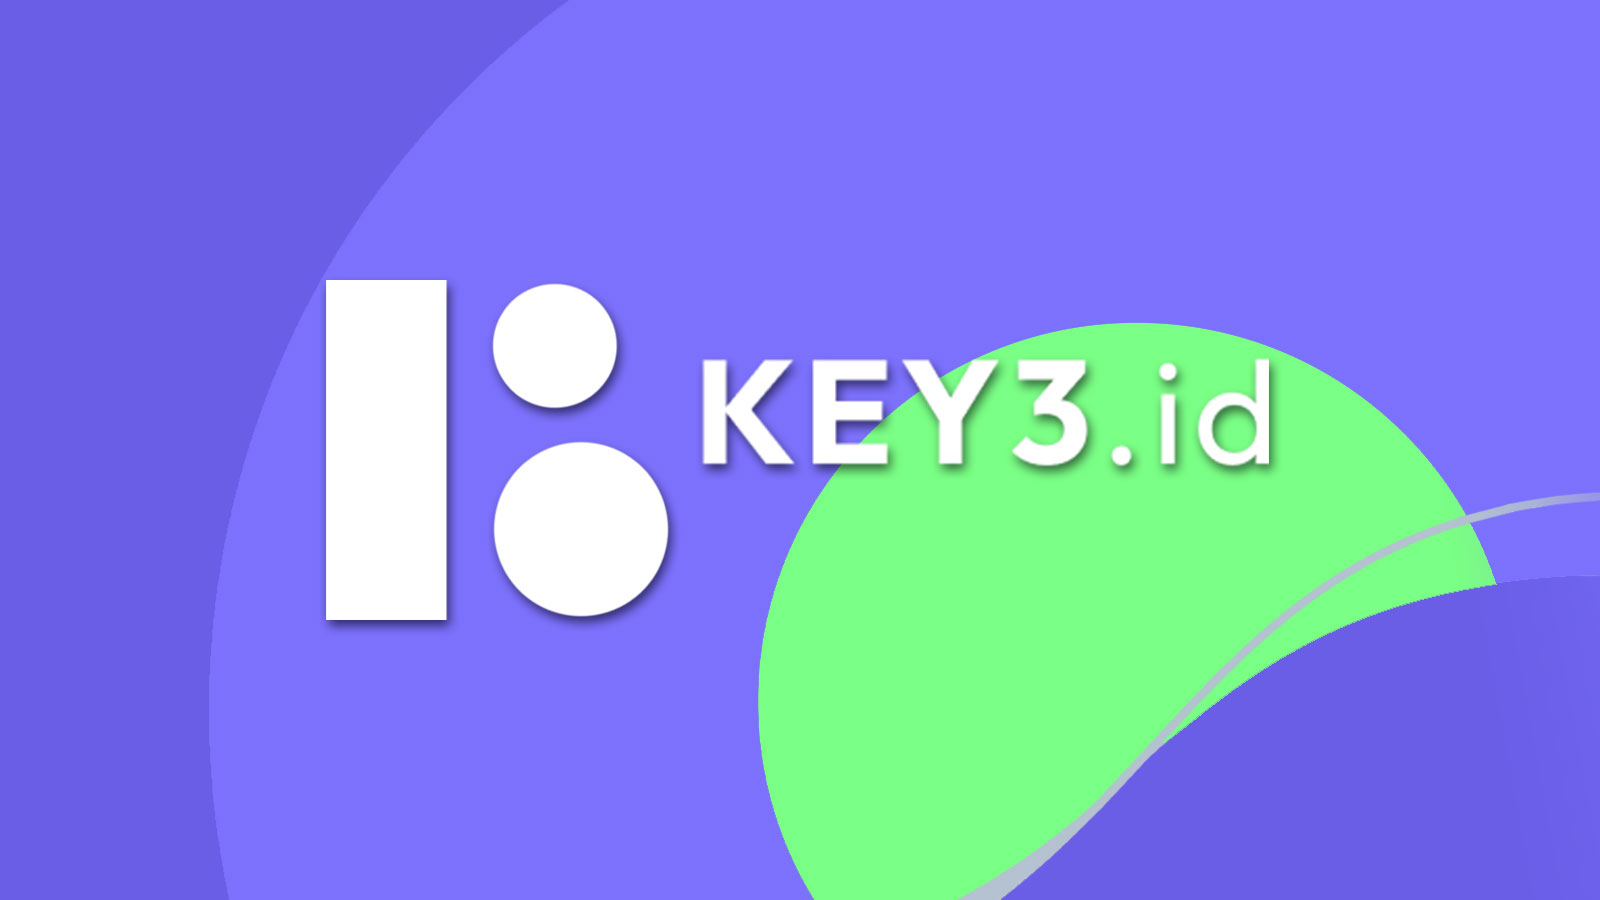 KEY3.id Has Reached a Combined 60,000 in Their Social Communities Within 1 Week After Its’ Launch